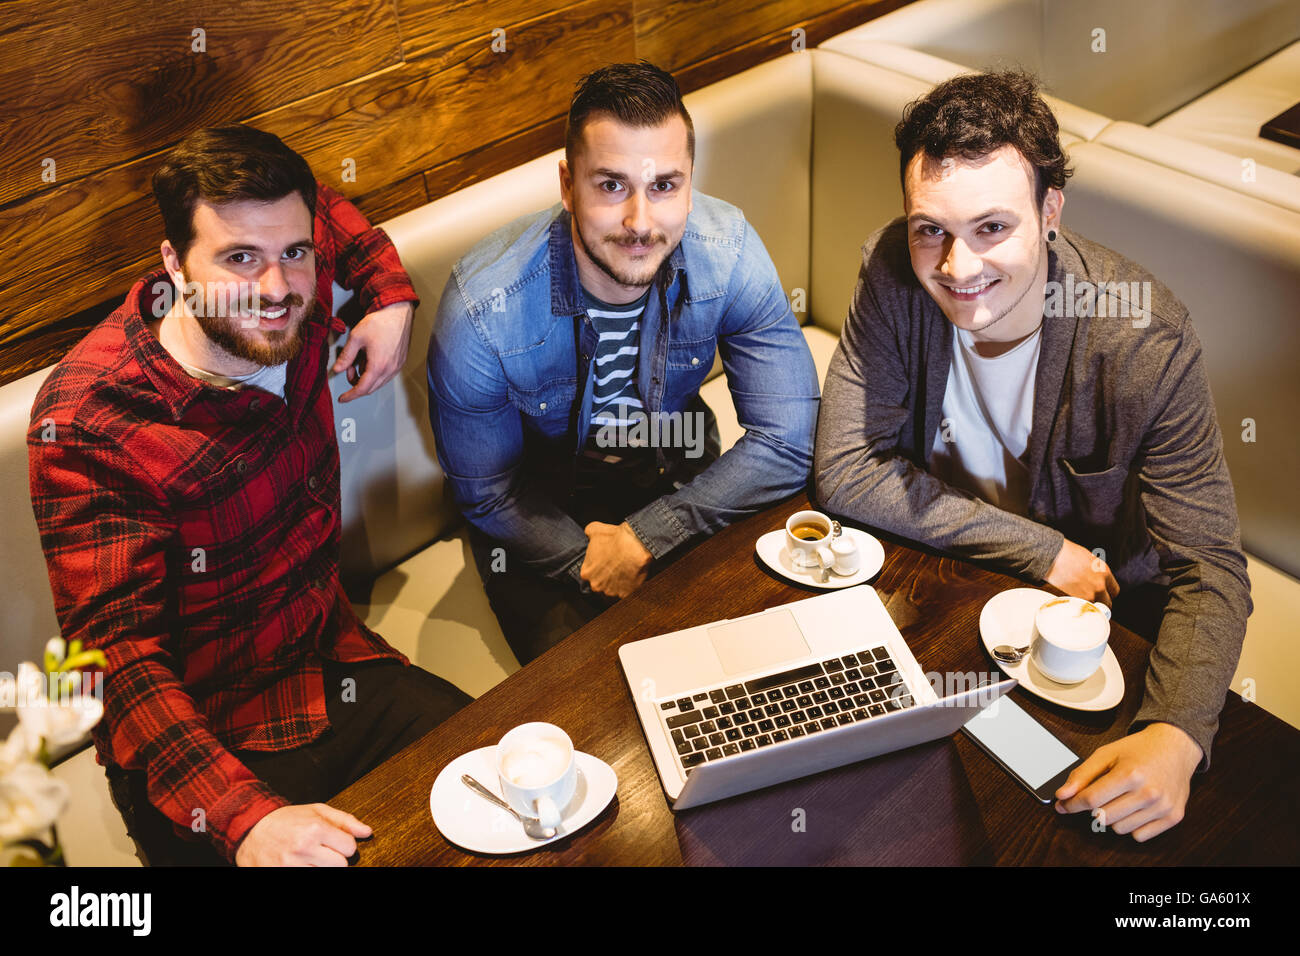 High angle portrait of male friends with laptop Banque D'Images